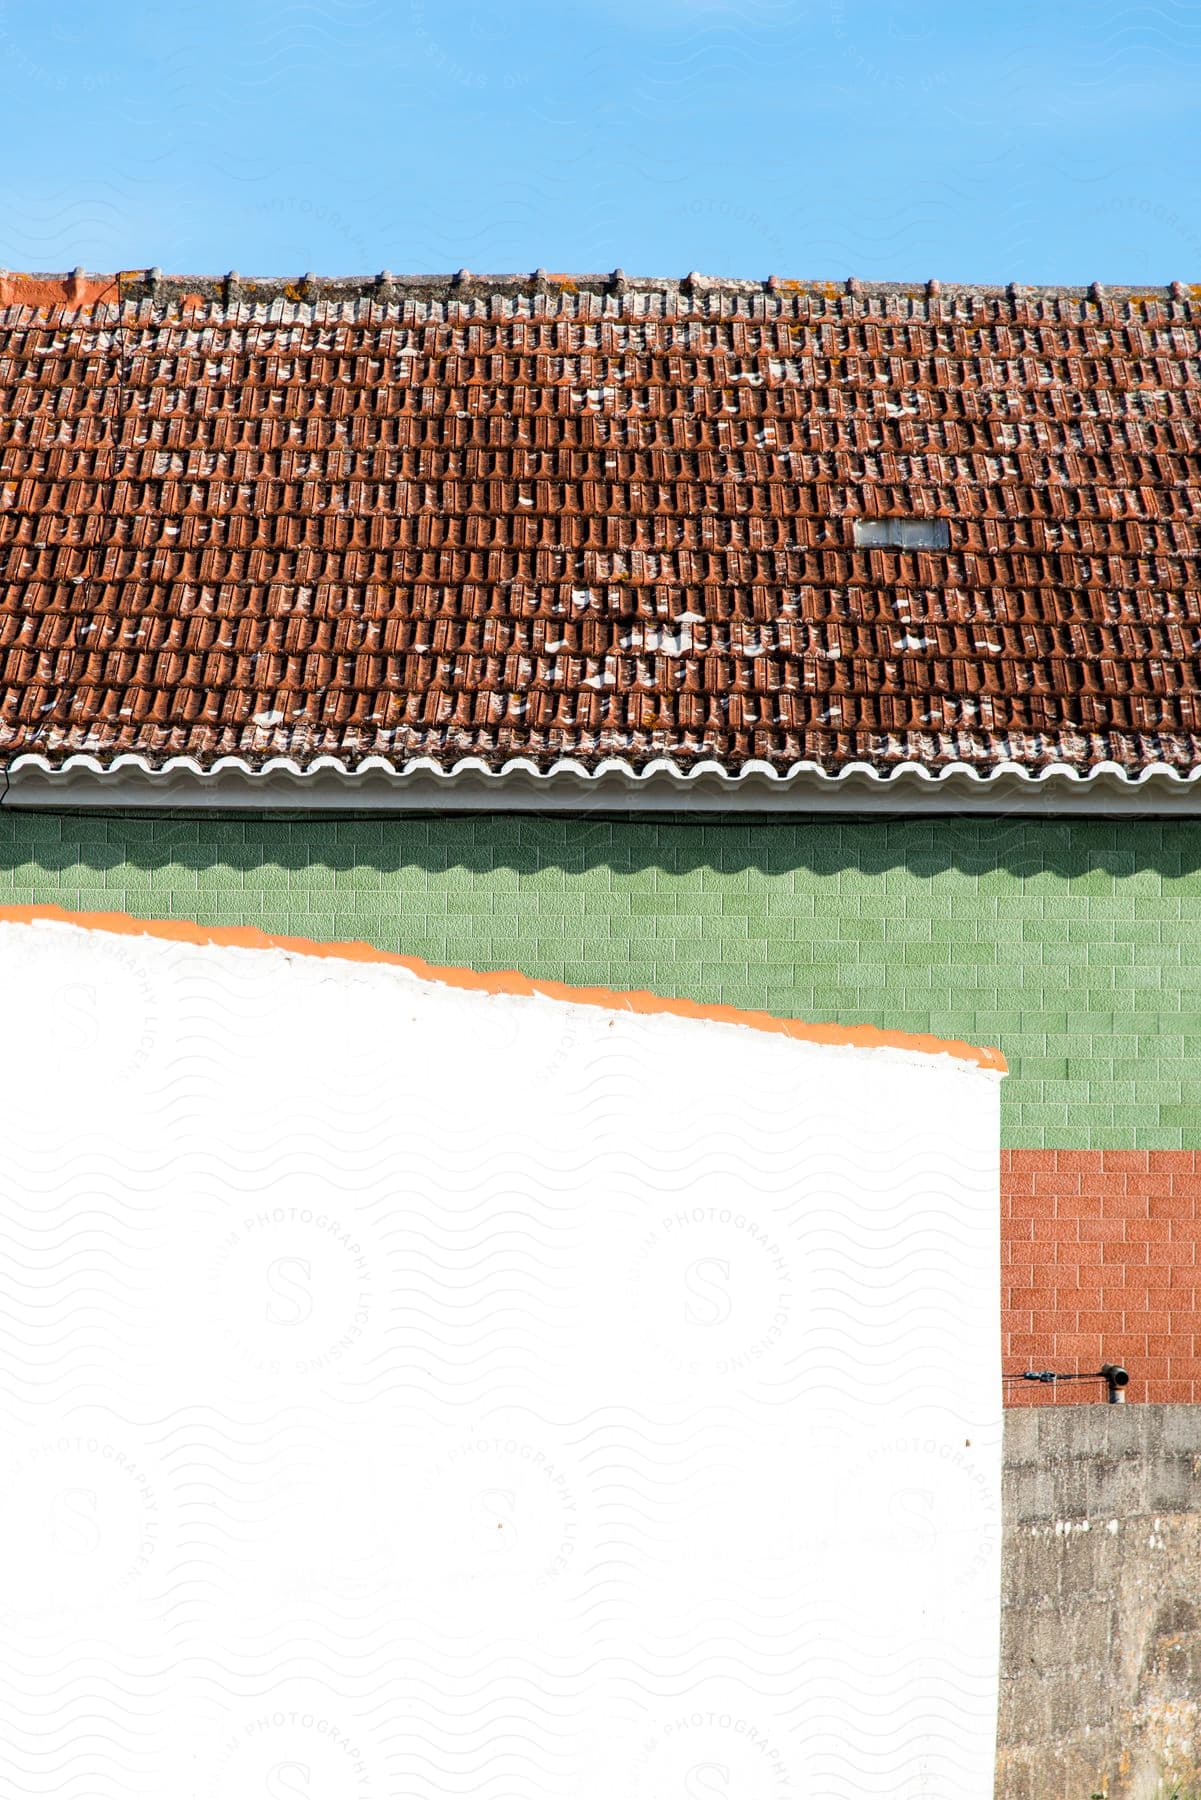 A white wall stands before a vibrant red and green brick building topped with red clay shingles